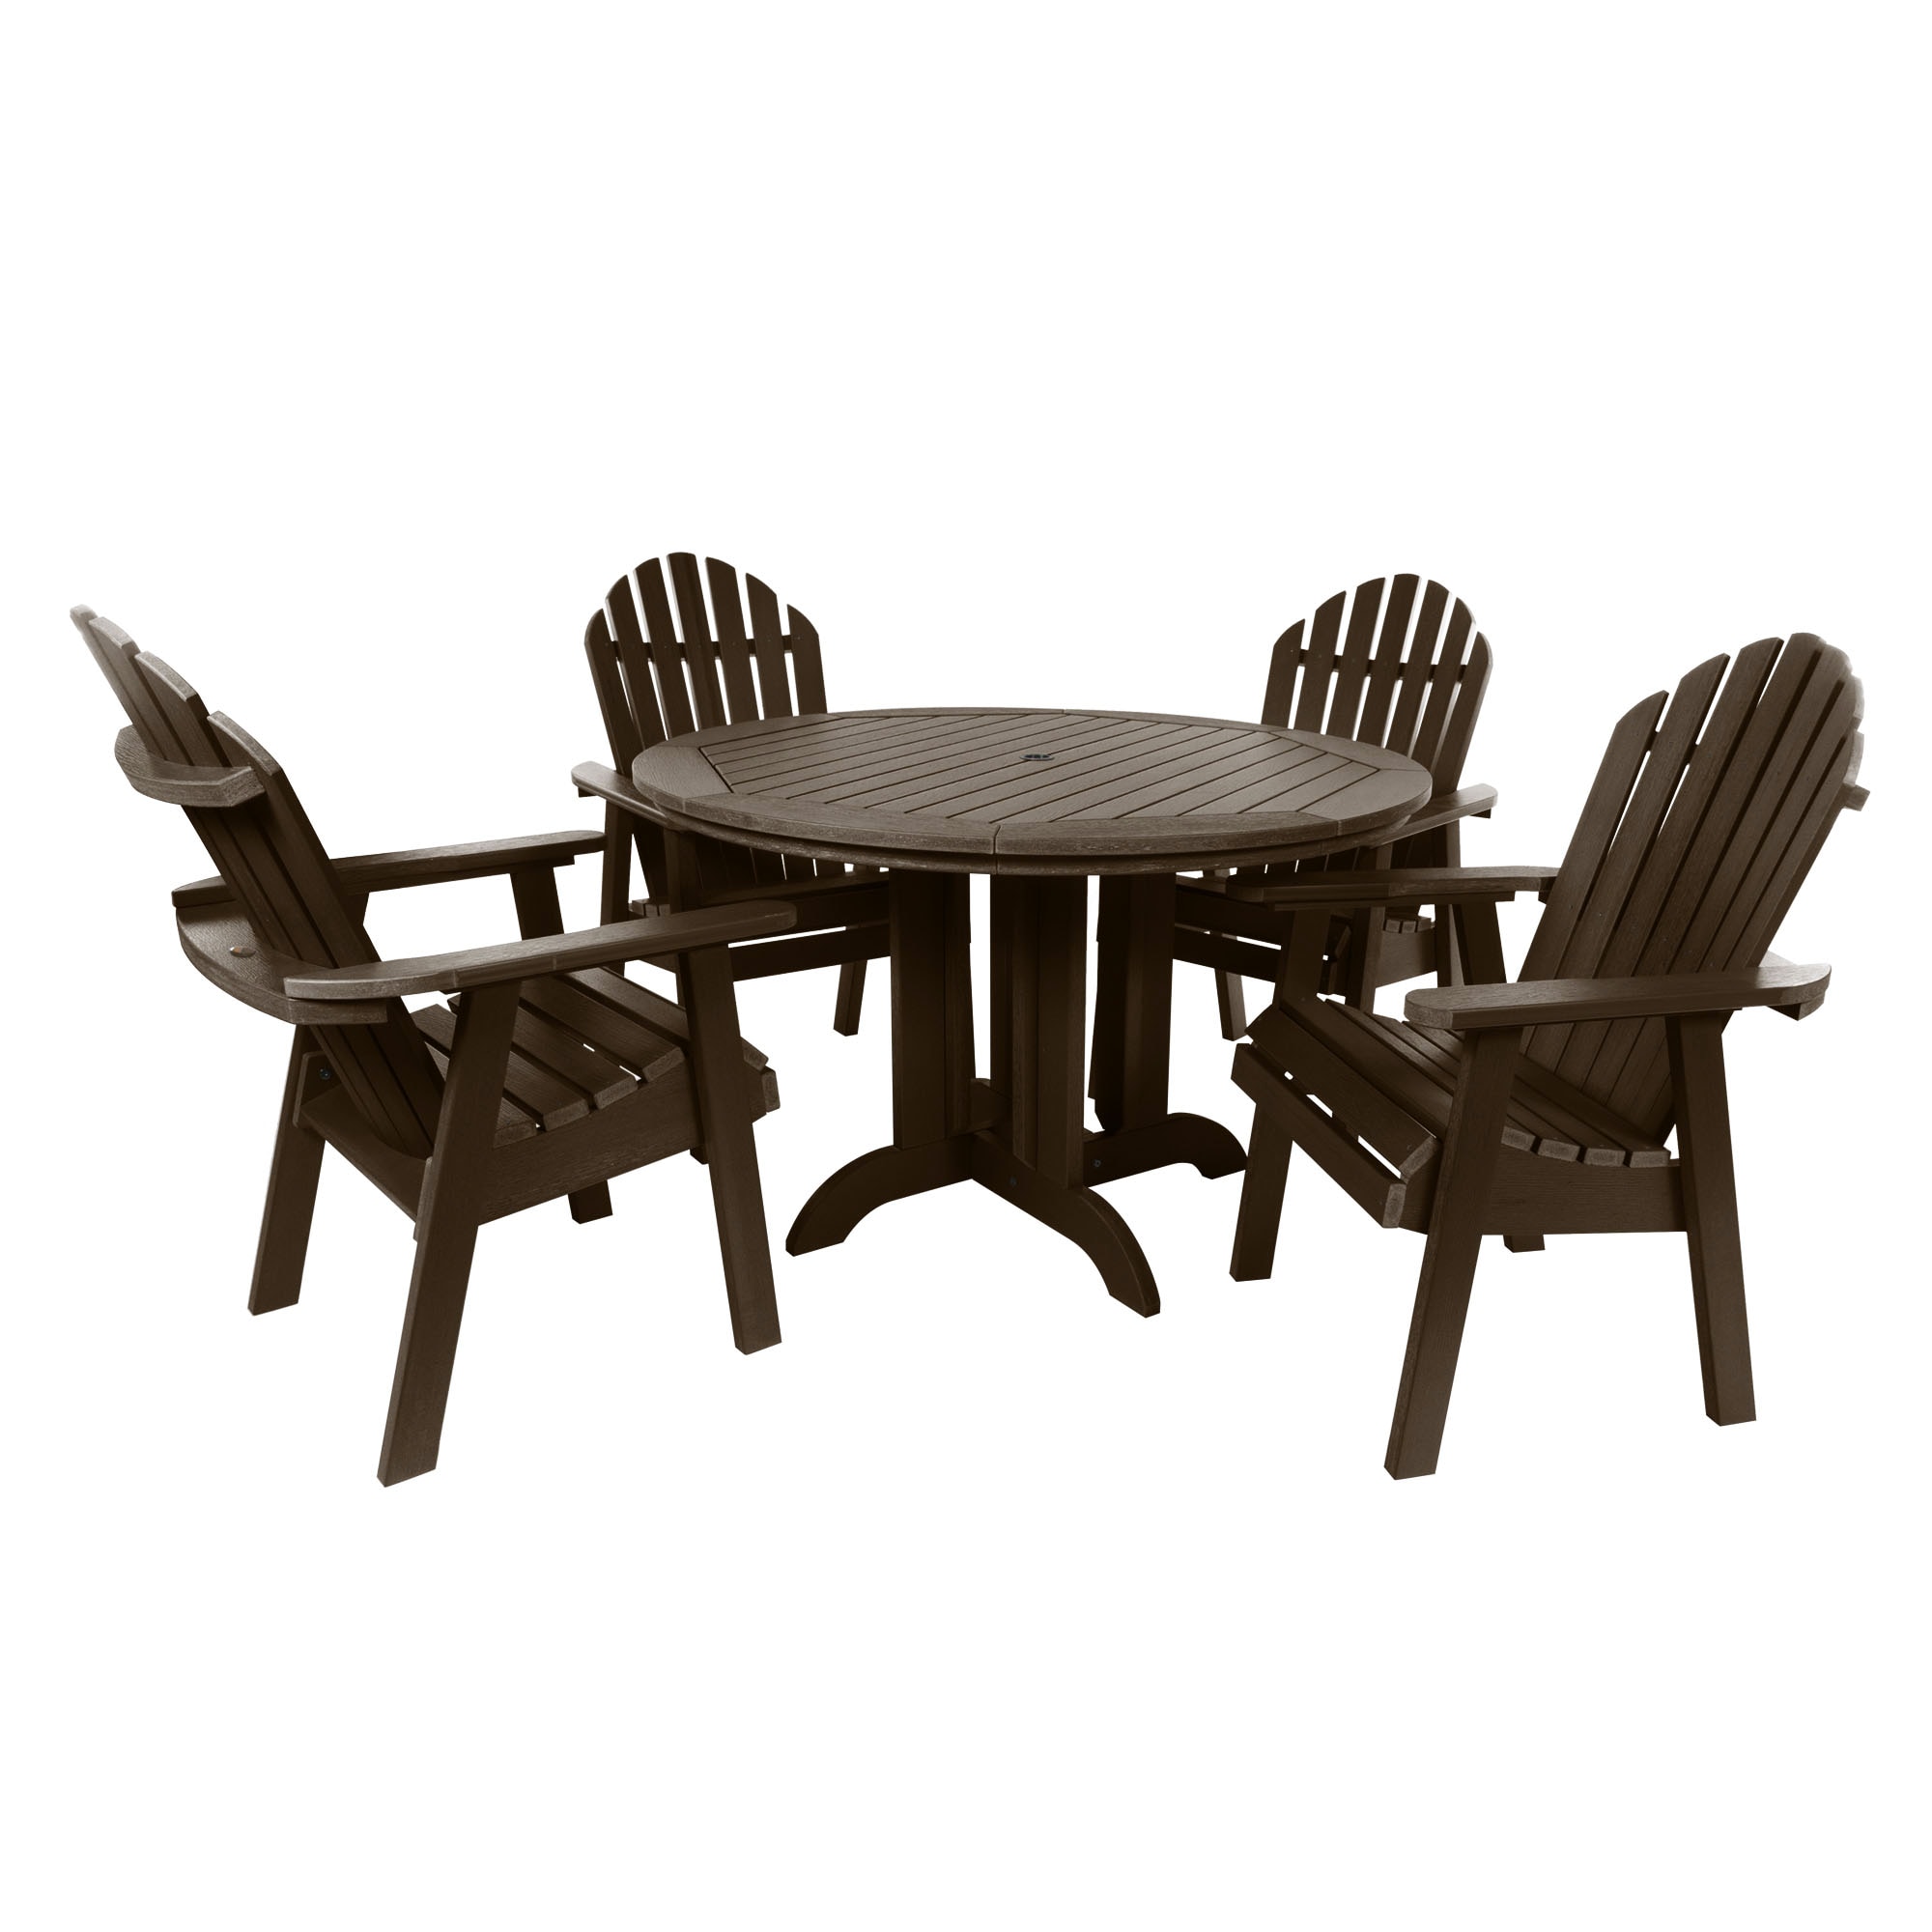 Highwood Sequoia Professional 5 Piece Brown Patio Dining Set In The